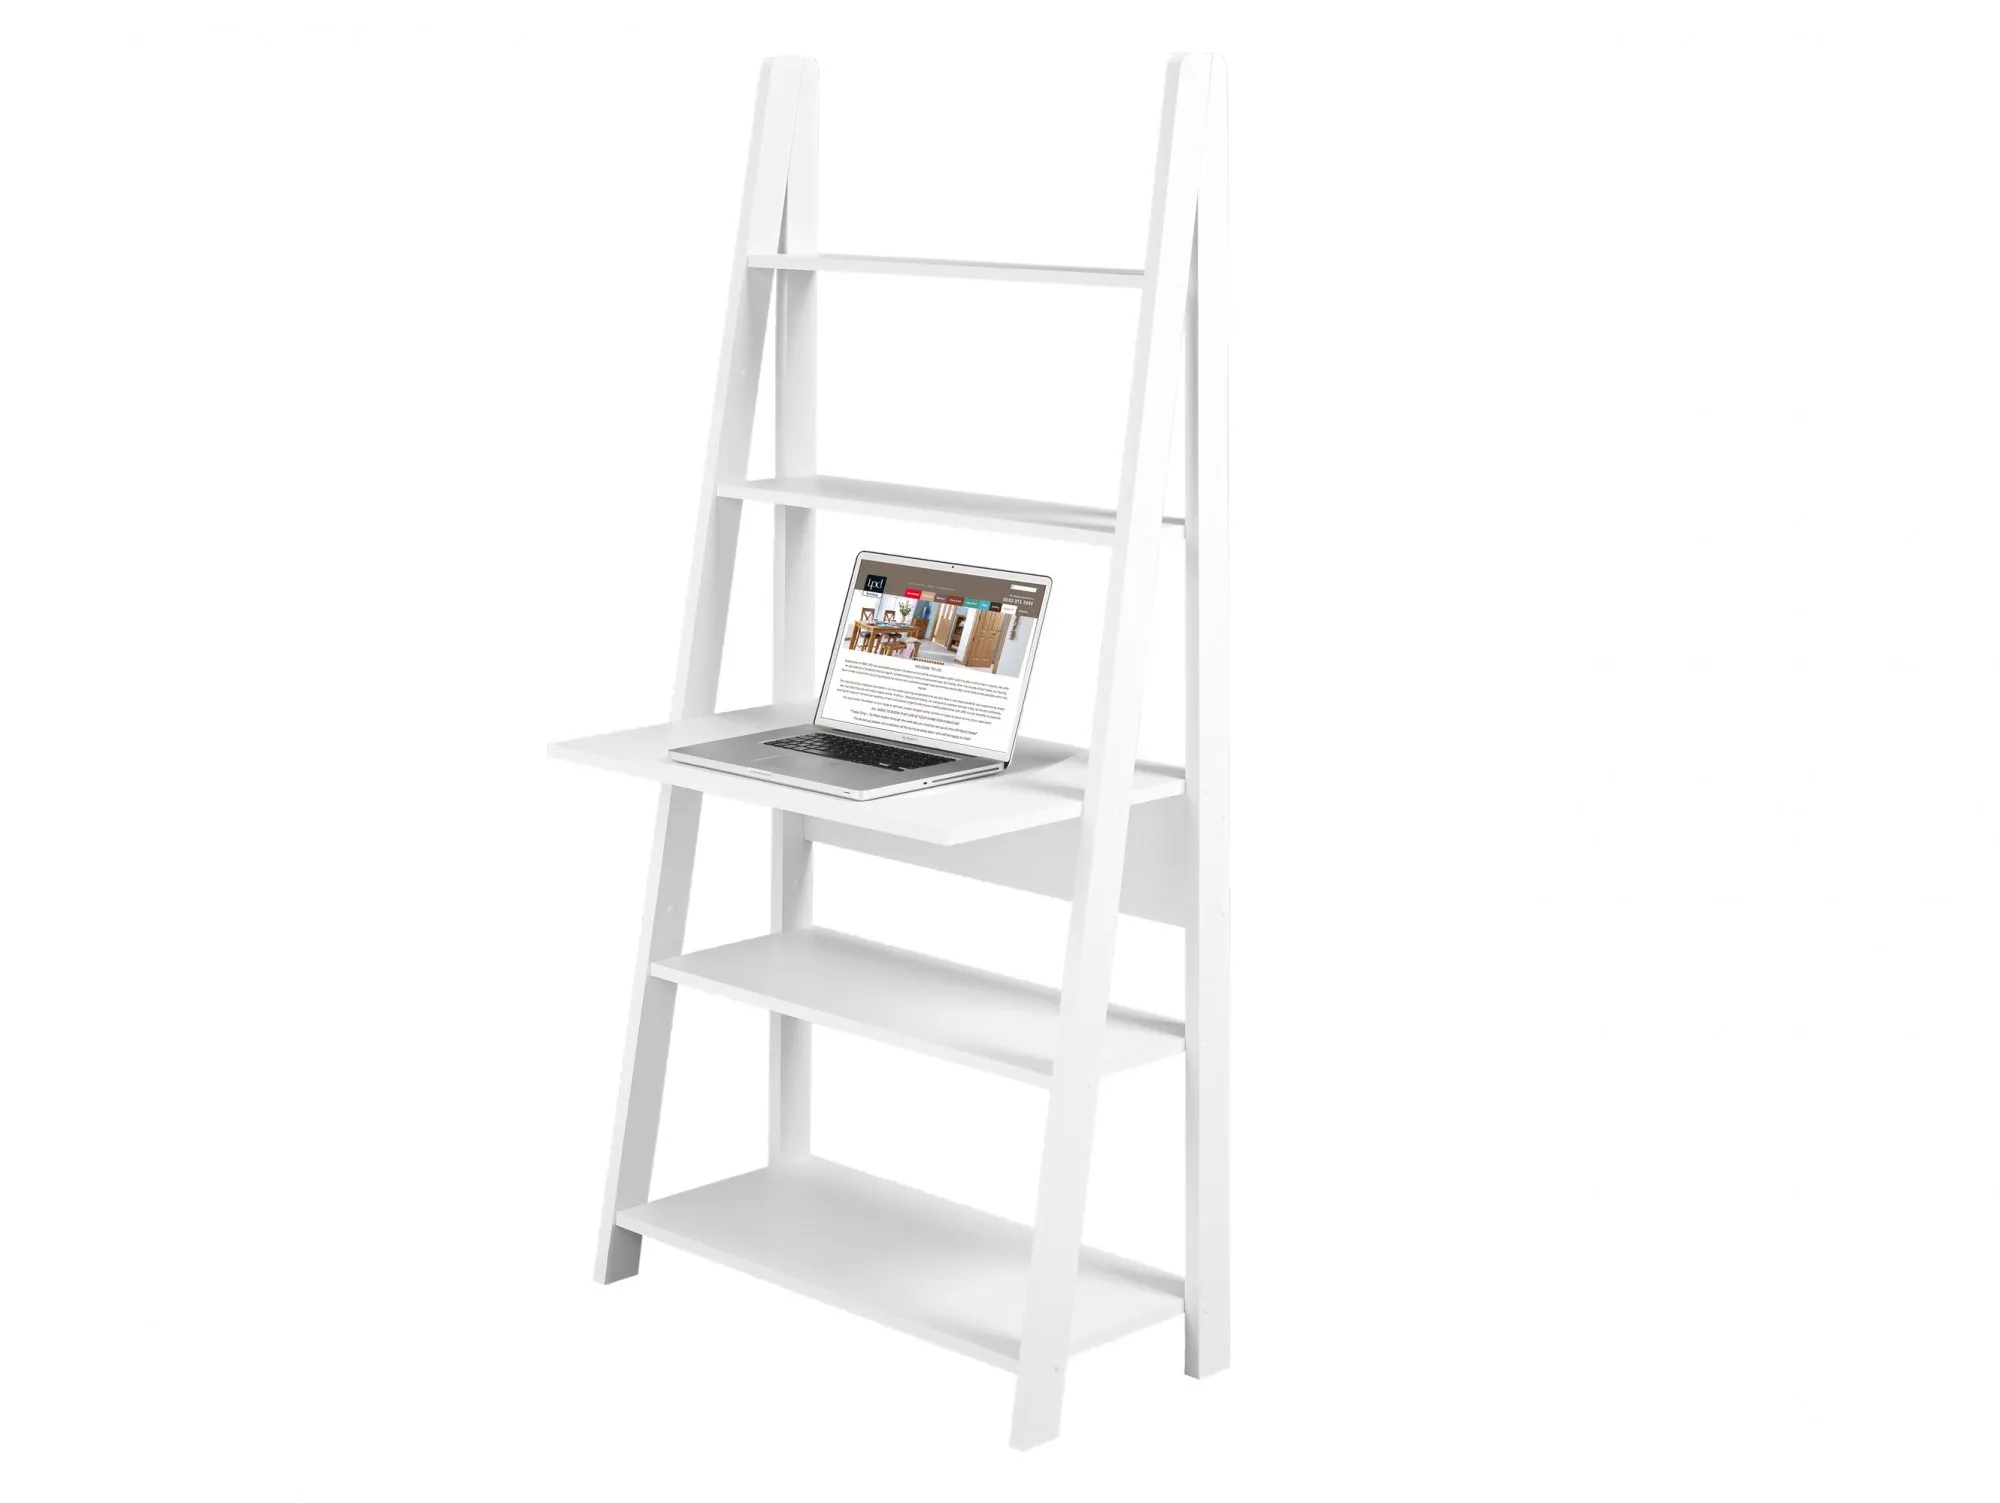 LPD LPD Tiva White Ladder Shelving Unit with Desk